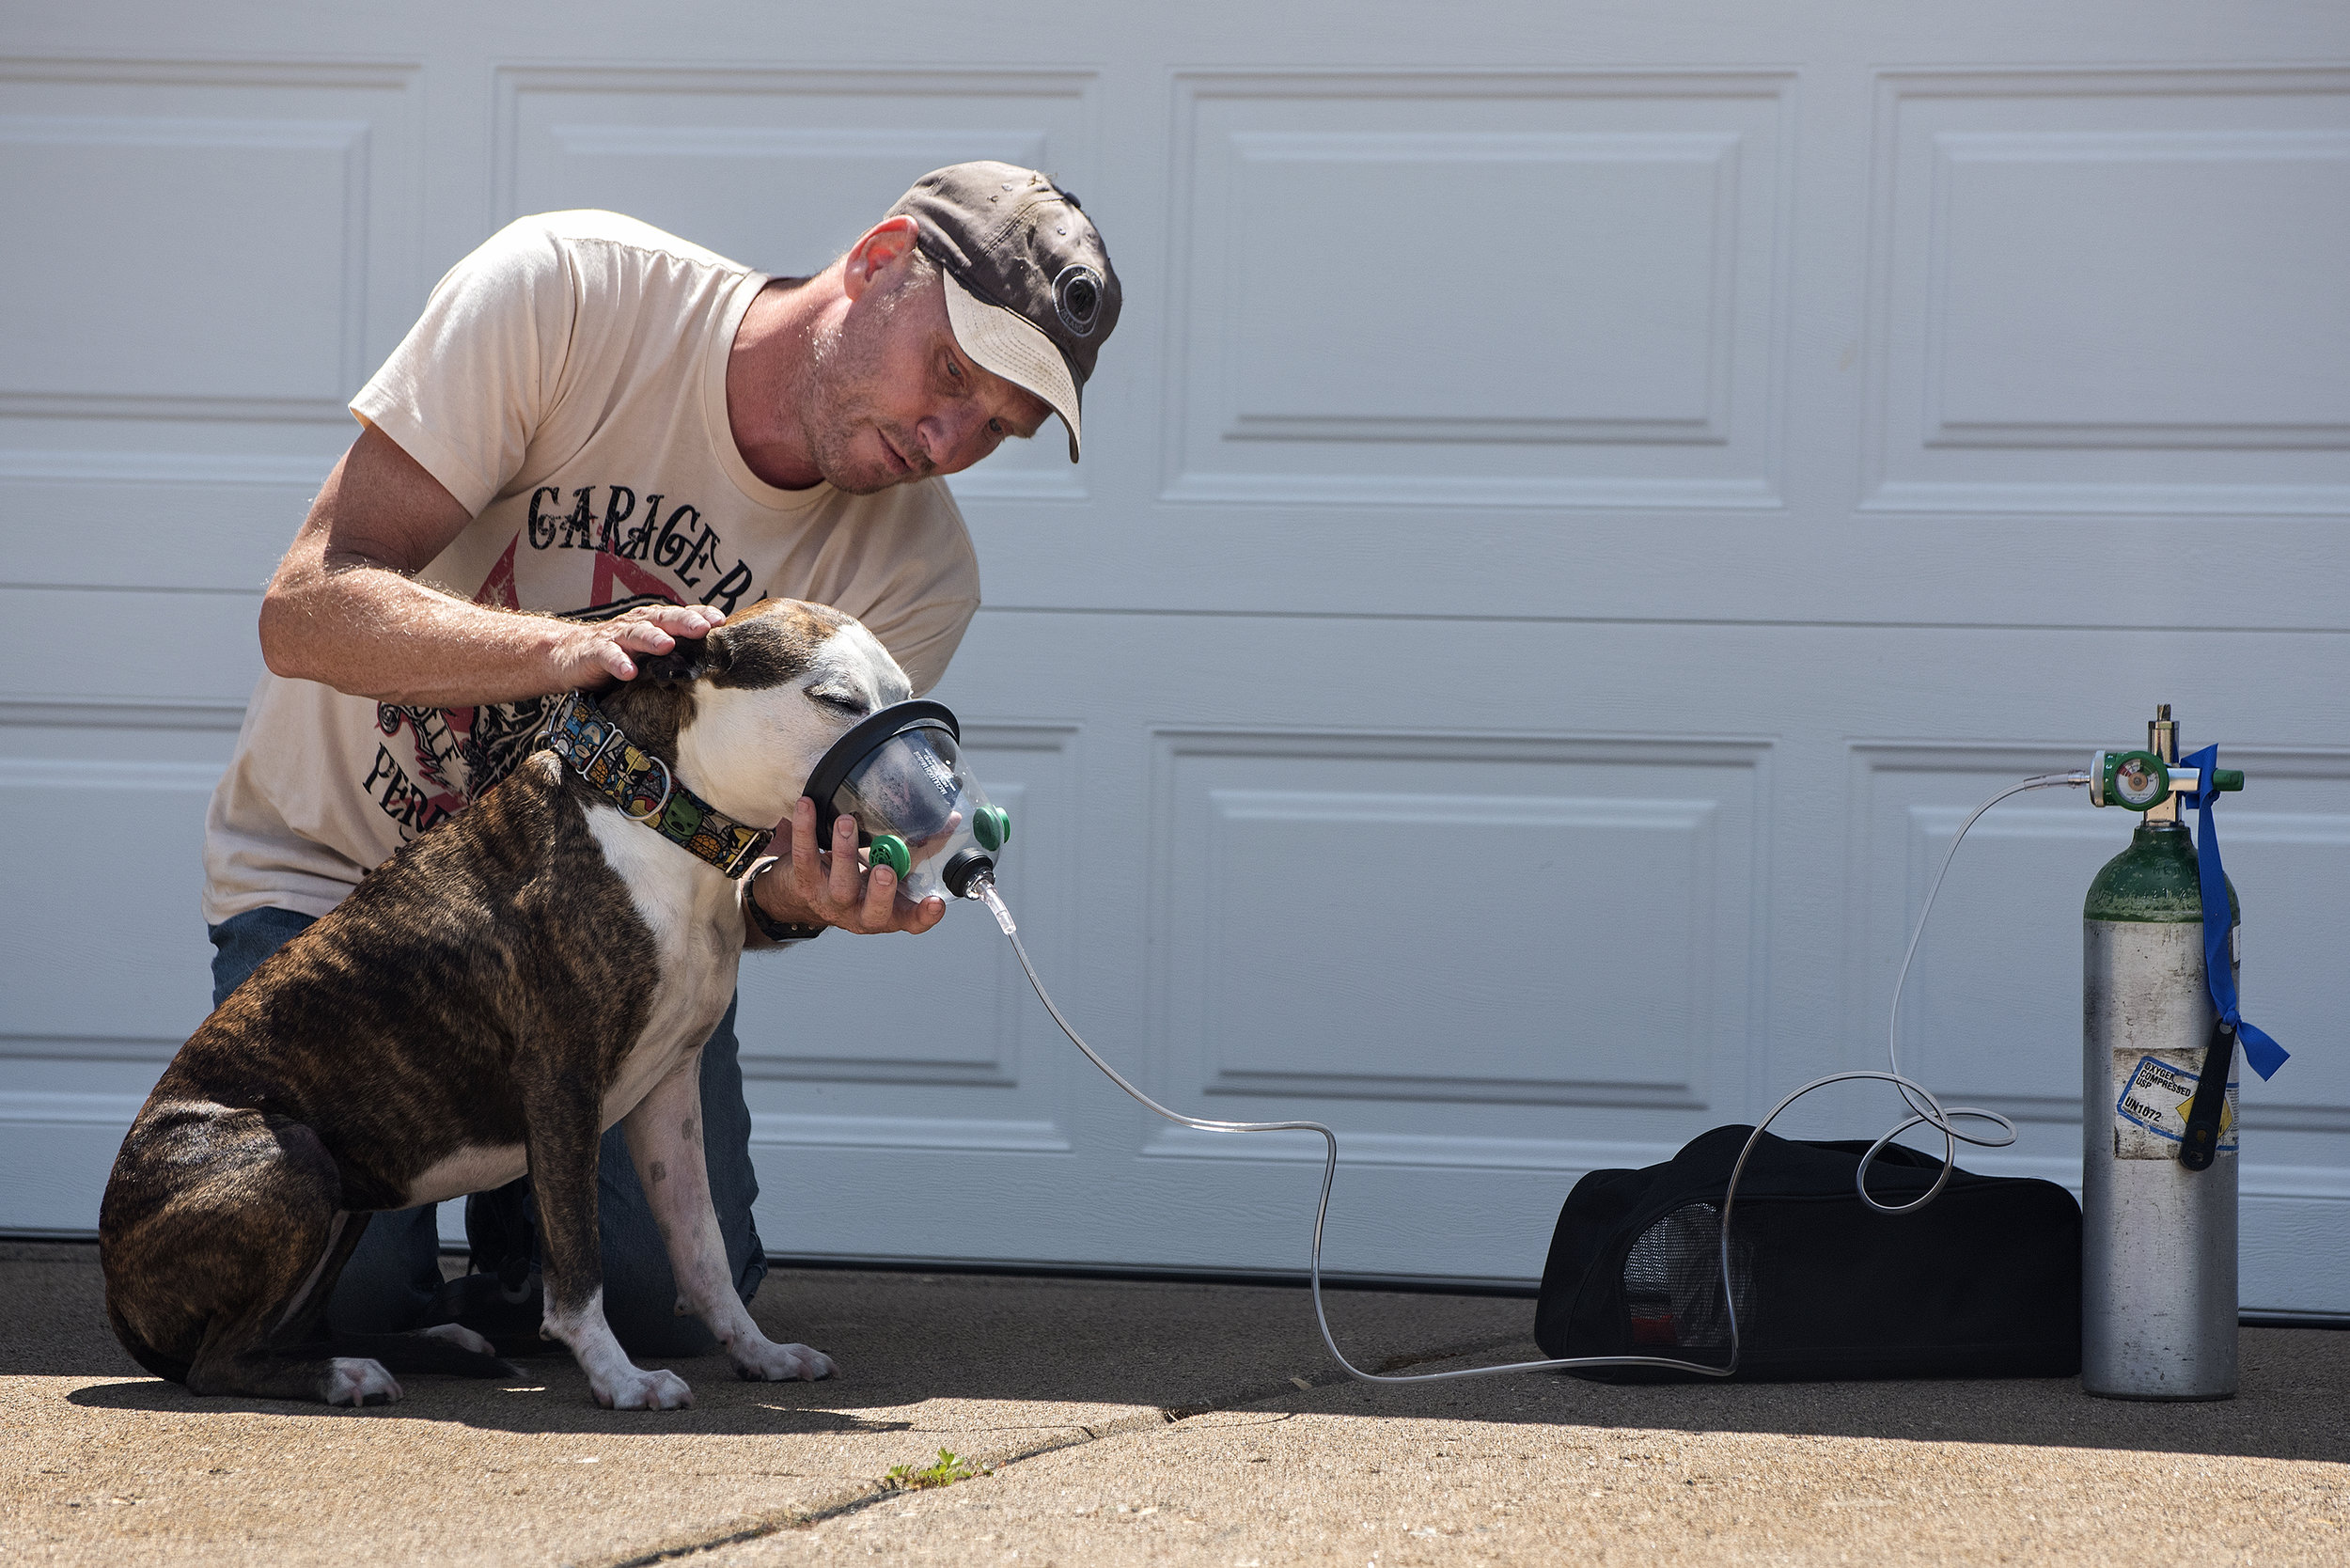  Ron Bristol cares for Lucy after the dog was rescued by firefighters from a house fire June 21 on 19th Avenue in Moline, Illinois. Bristol, a neighbor of the Carr family whose house caught fire, said Lucy was located in the basement of the home. Jim